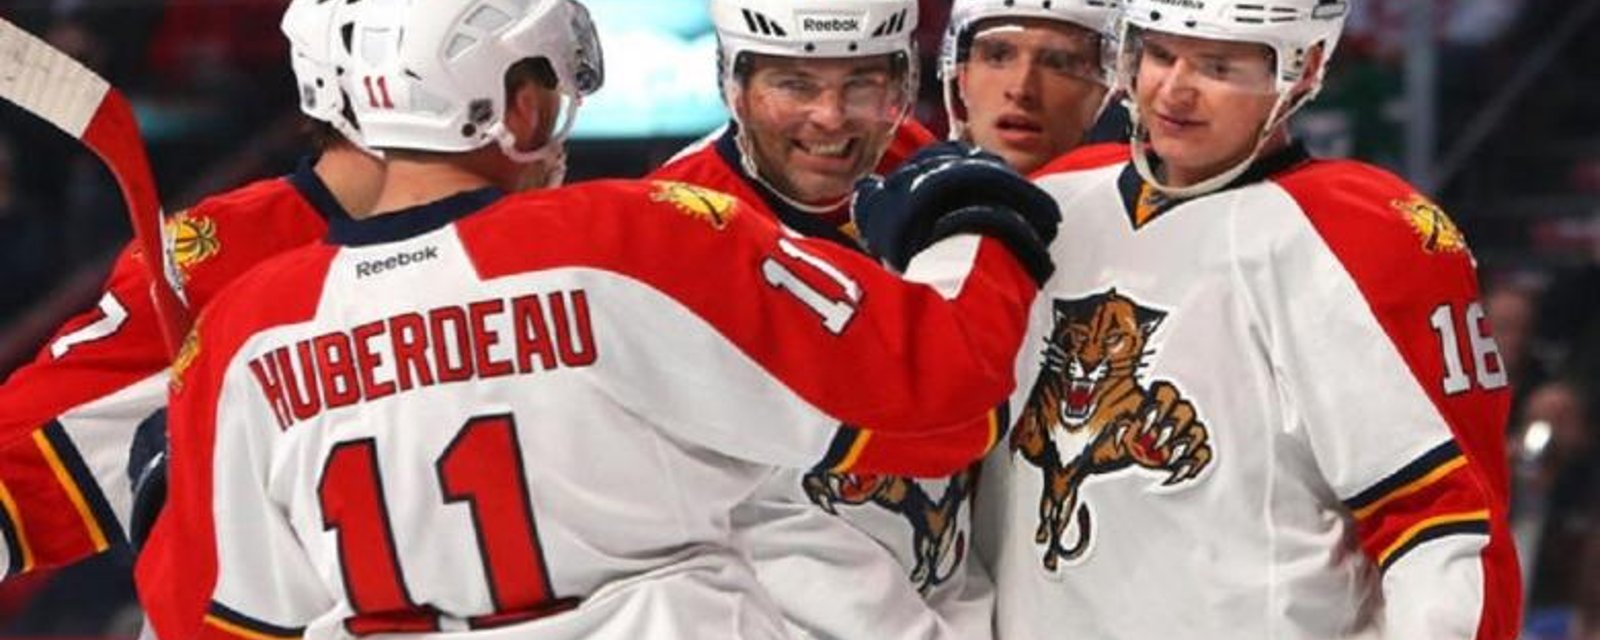 Florida Panthers continue their very impressive streak